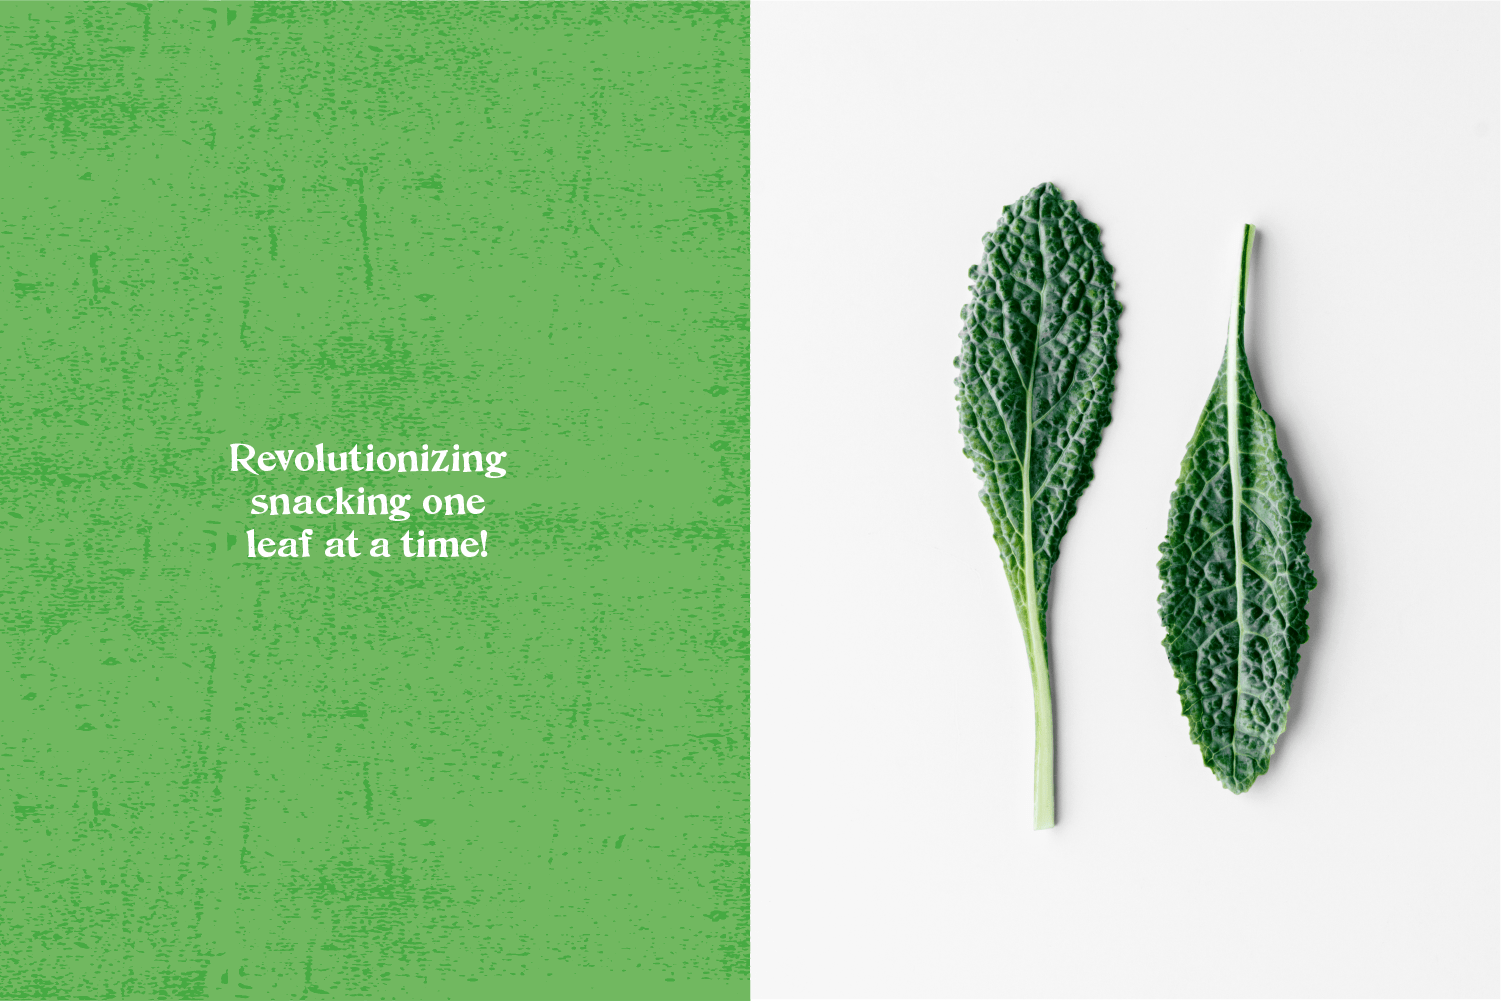 Alive & Radiant, Revolutionizing snacking one leaf at a time!